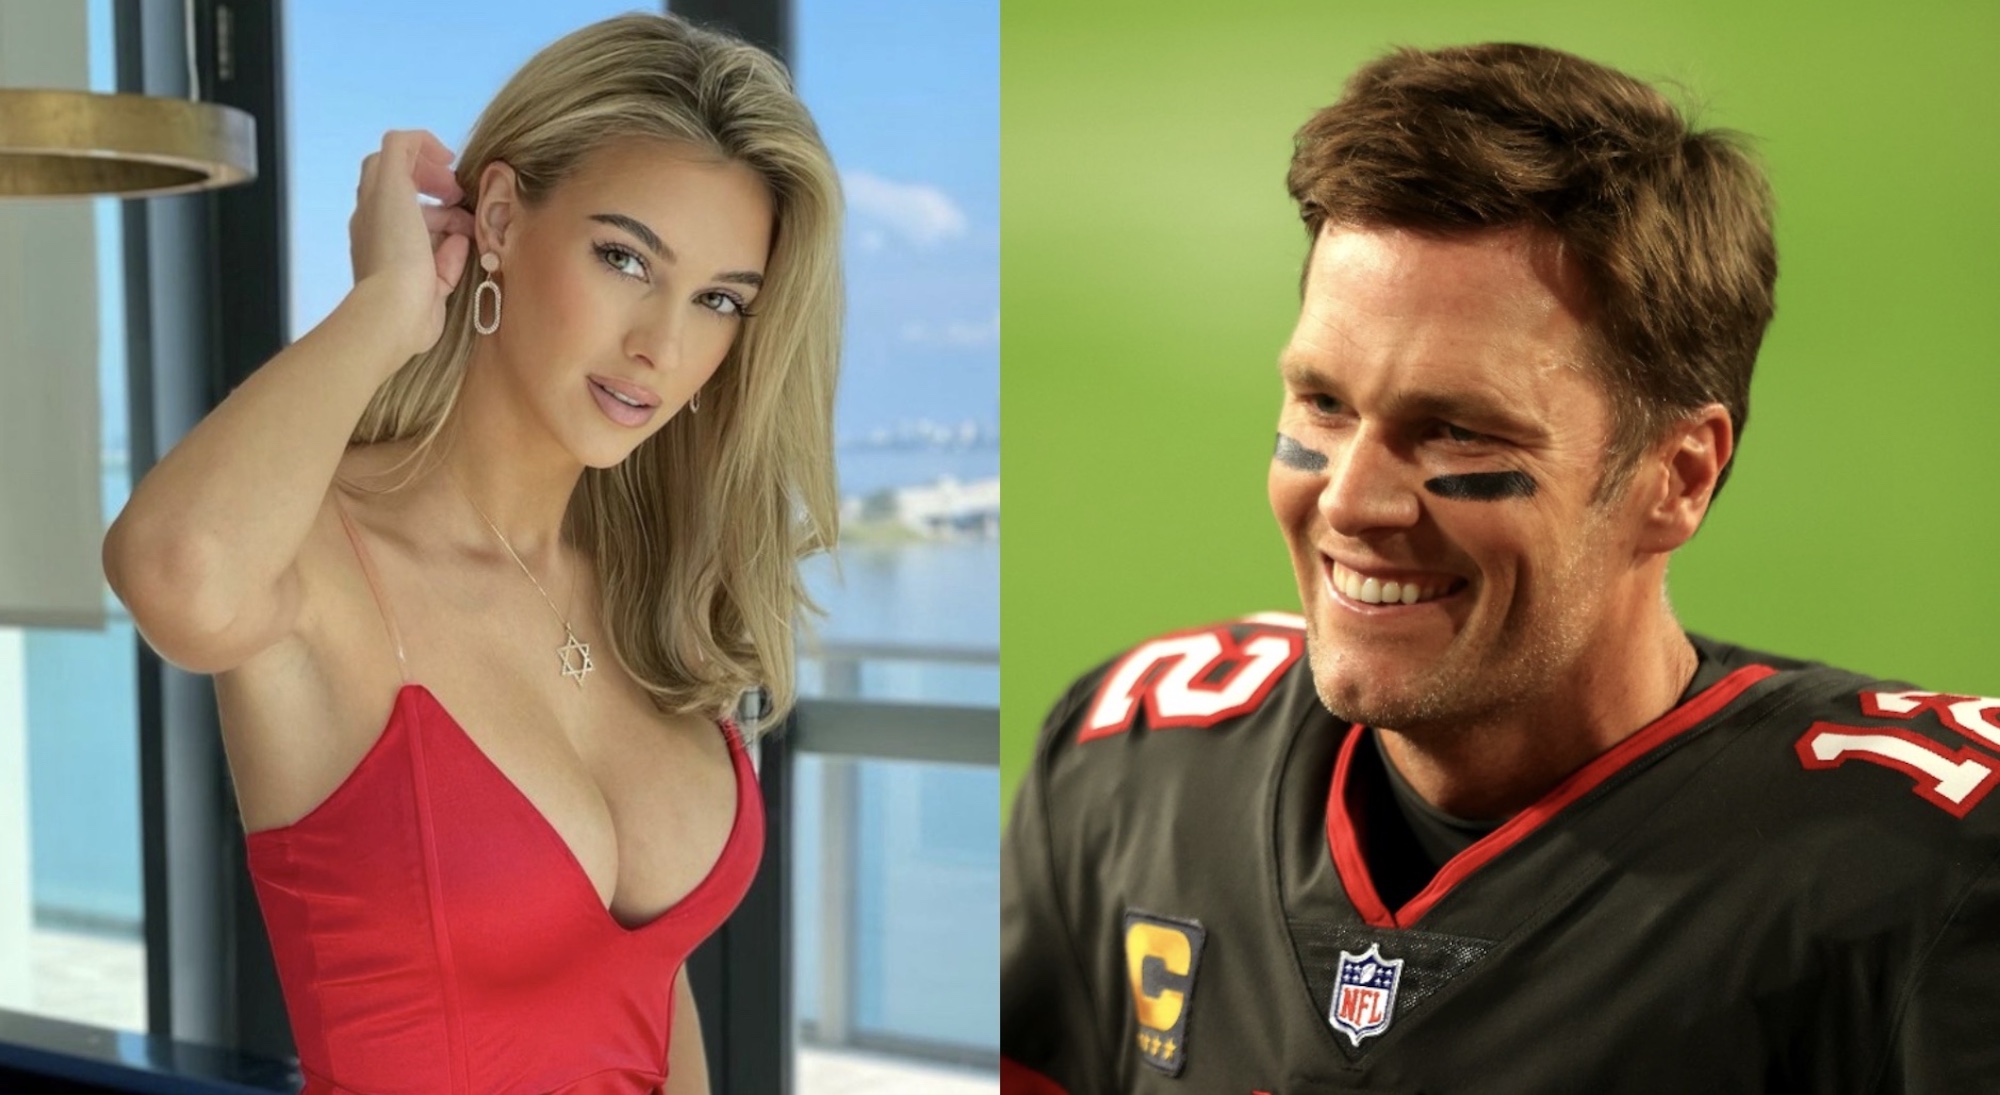 Tom Brady Supposed GF Gets Extra Racy With Underwear Photo pic